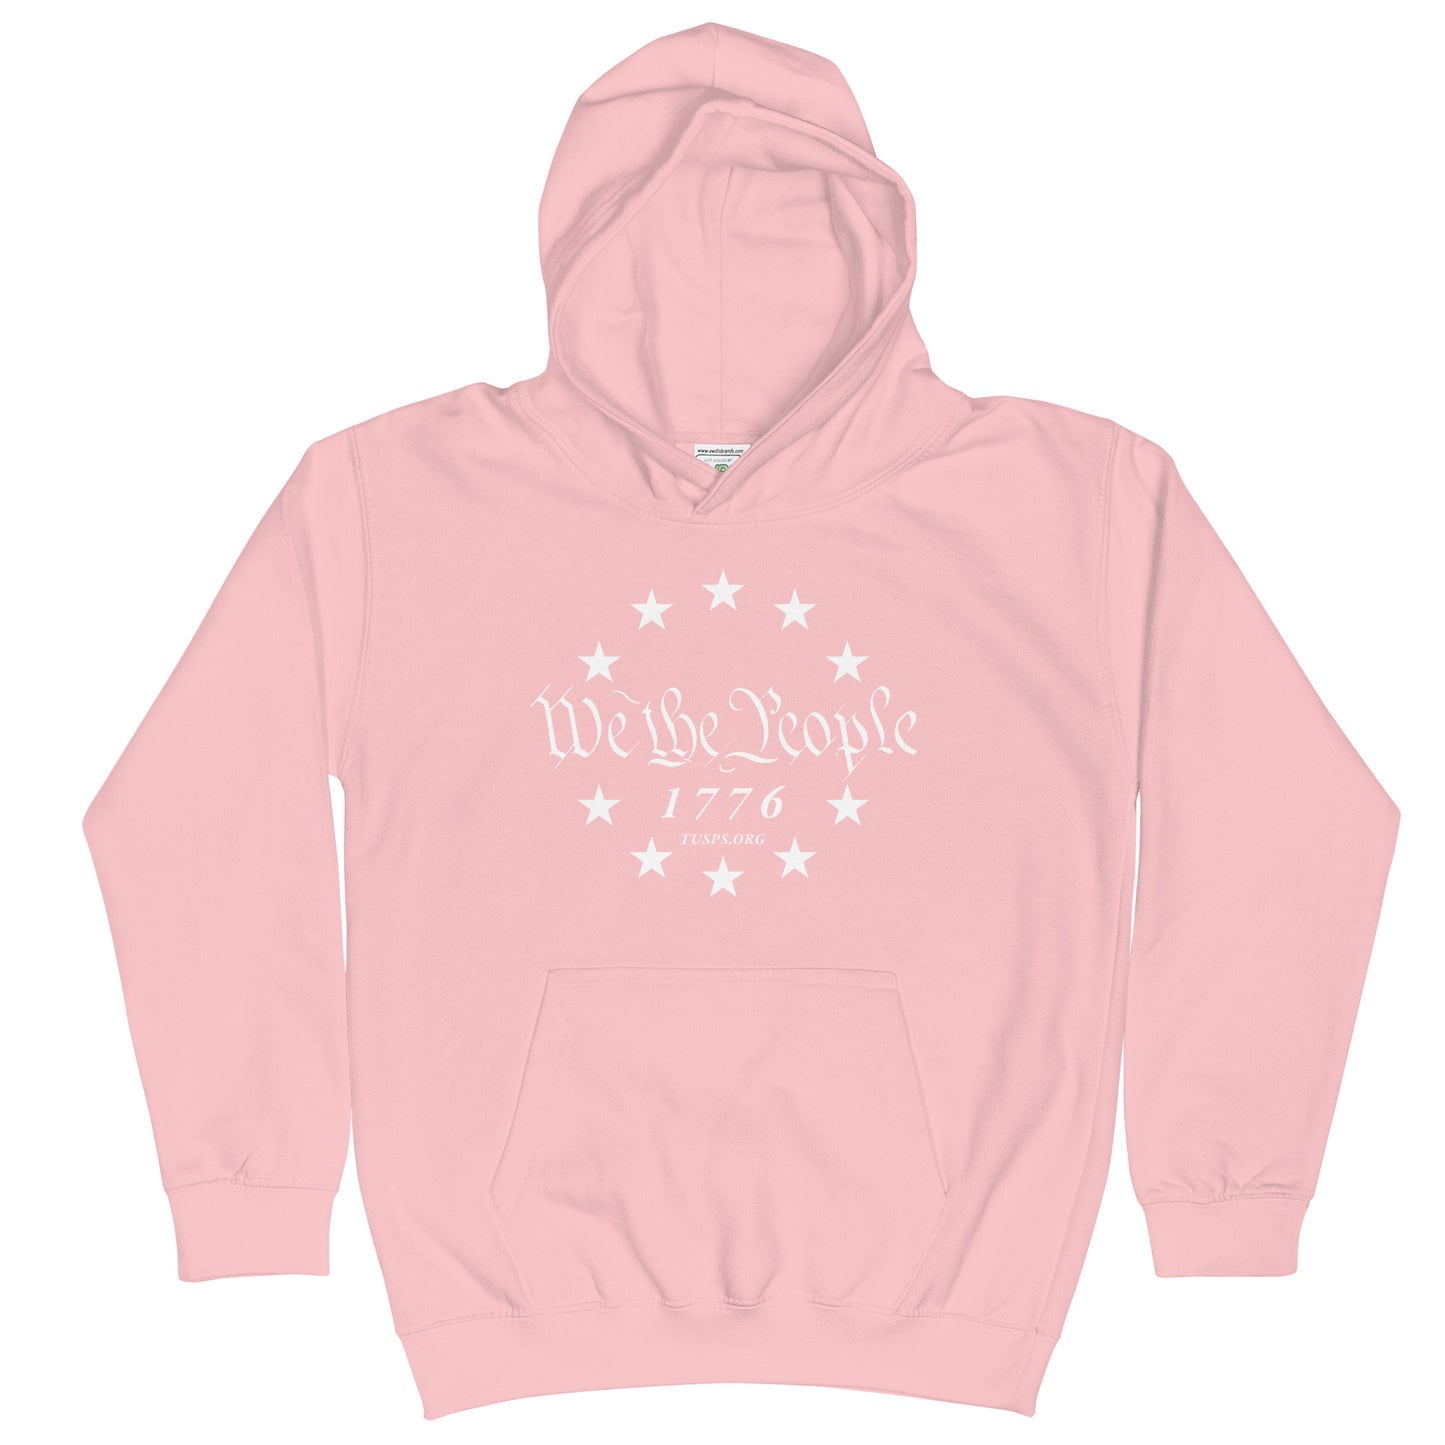 YOUTH - BETSY ROSS HOODIE